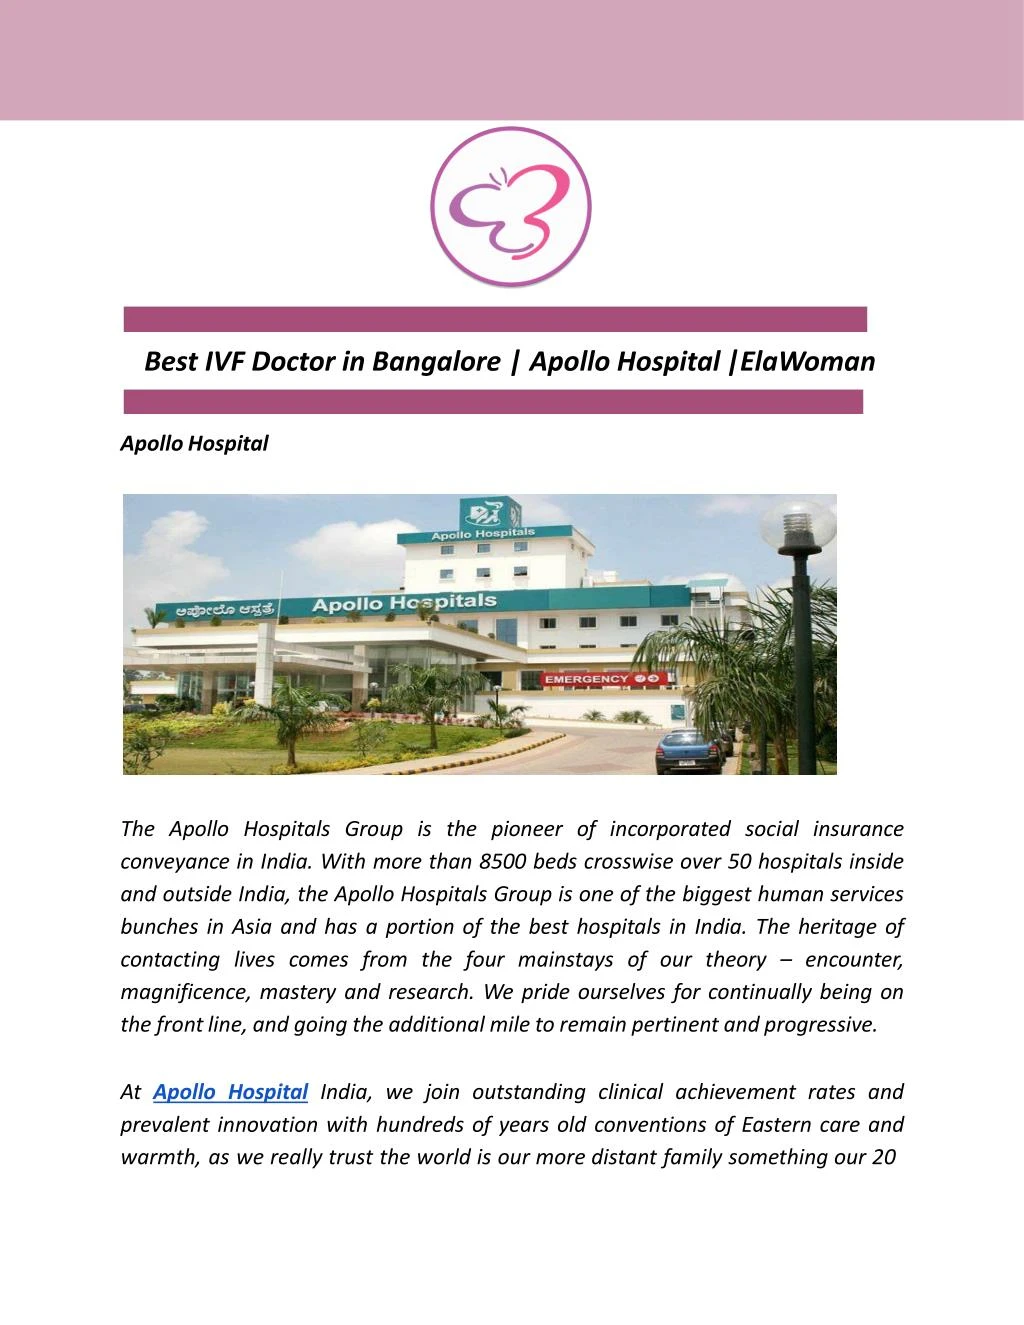 best ivf doctor in bangalore apollo hospital